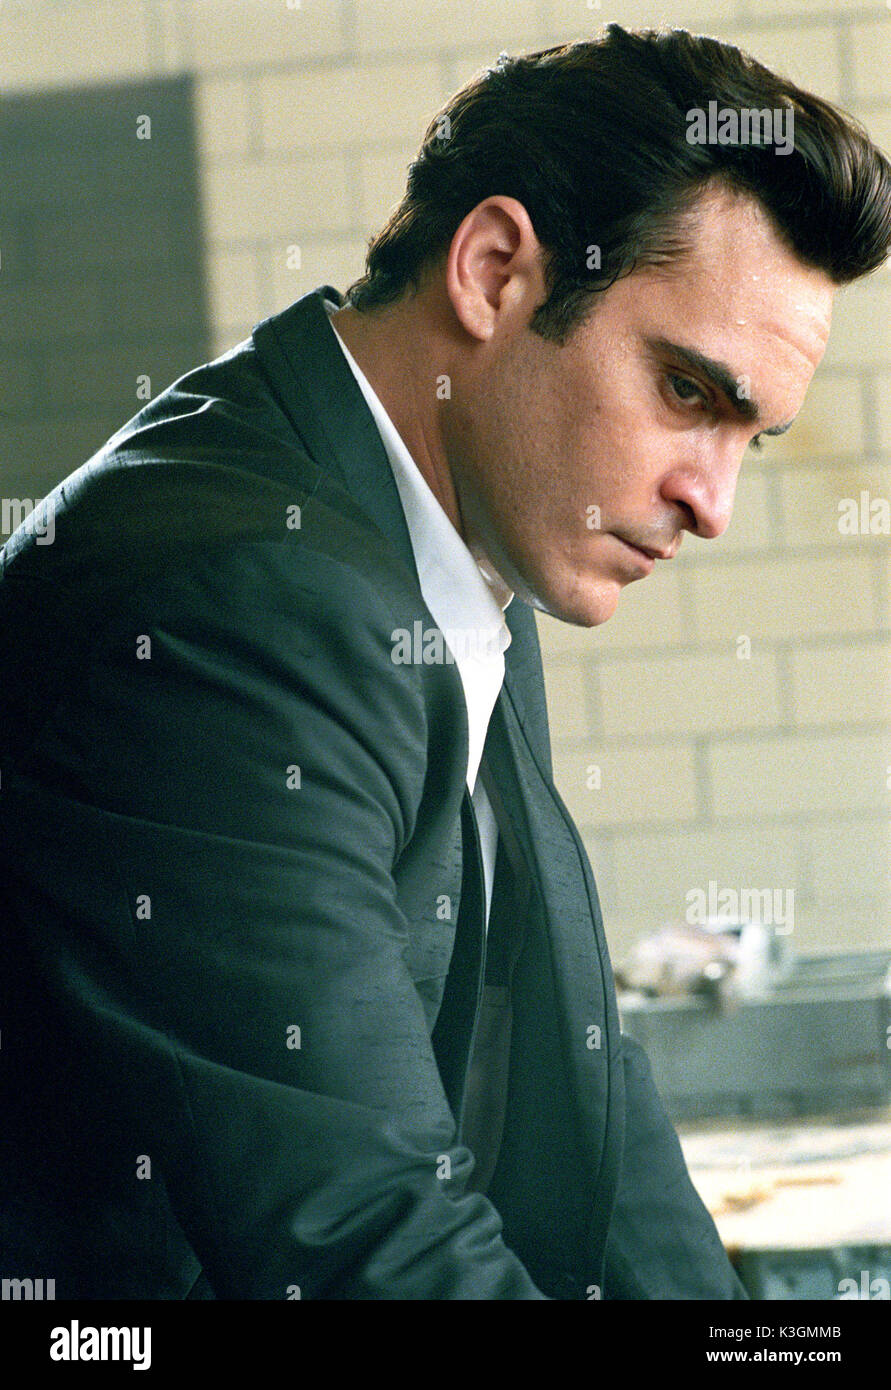 WTL-87 Joaquin Phoenix as the young Johnny Cash, an artist whose music transcended musical boundaries to touch people around the globe, in WALK THE LINE. Photo credit: Suzanne Tenner TM and  2005 Twentieth Century Fox. All Rights Reserved. Not for sale or duplication. WALK THE LINE JOAQUIN PHOENIX as Johnny Cash WTL-87 Joaquin Phoenix as the young Johnny Cash, an artist whose music transcended musical boundaries to touch people around the globe, in WALK THE LINE. Photo credit: Suzanne Tenner TM and  2005 Twentieth Century Fox. All Rights Reserved. Not for sale or duplication.     Date: 2 Stock Photo